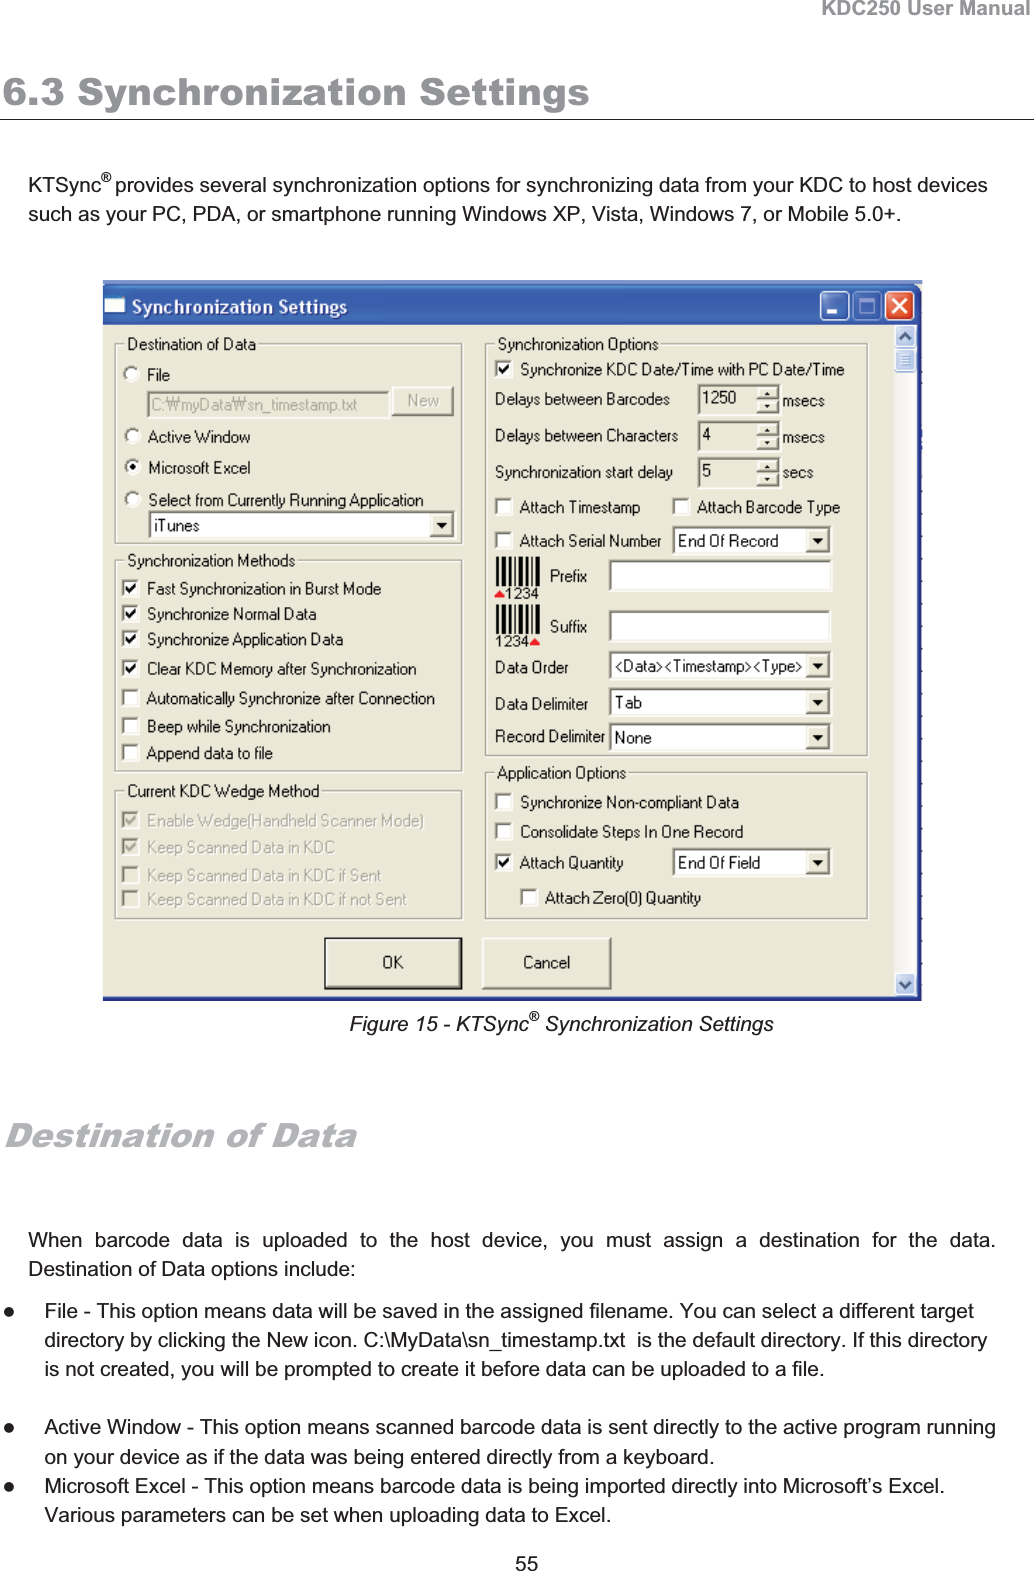 KDC250 User Manual 55 6.3 Synchronization Settings KTSync®provides several synchronization options for synchronizing data from your KDC to host devices such as your PC, PDA, or smartphone running Windows XP, Vista, Windows 7, or Mobile 5.0+.   Destination of Data When barcode data is uploaded to the host device, you must assign a destination for the data.  Destination of Data options include: zFile - This option means data will be saved in the assigned filename. You can select a different target directory by clicking the New icon. C:\MyData\sn_timestamp.txt  is the default directory. If this directory is not created, you will be prompted to create it before data can be uploaded to a file. zActive Window - This option means scanned barcode data is sent directly to the active program running on your device as if the data was being entered directly from a keyboard. zMicrosoft Excel - This option means barcode data is being imported directly into Microsoft’s Excel. Various parameters can be set when uploading data to Excel. Figure 15 - KTSync® Synchronization Settings